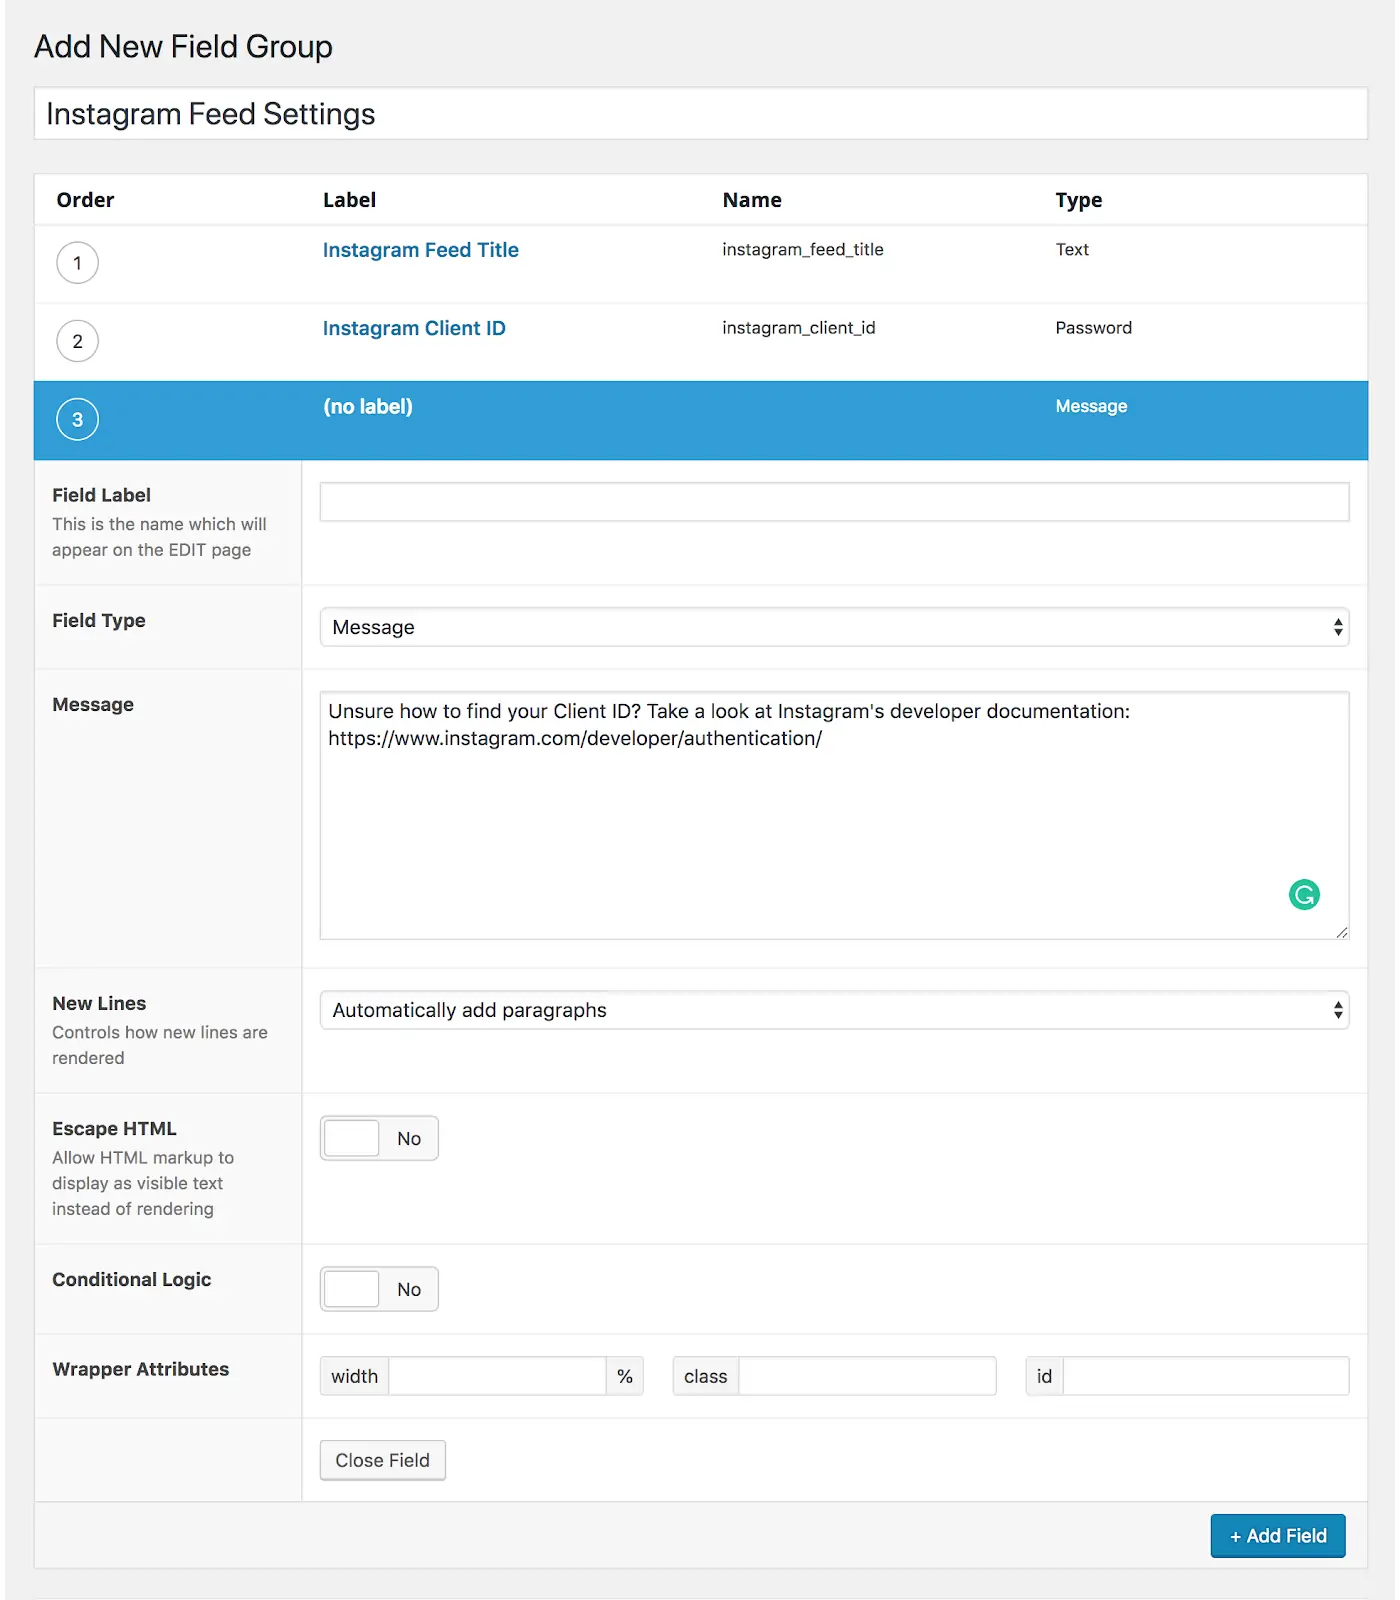 WordPress's Add New Field Group section to add types, labels, wrappers, and more